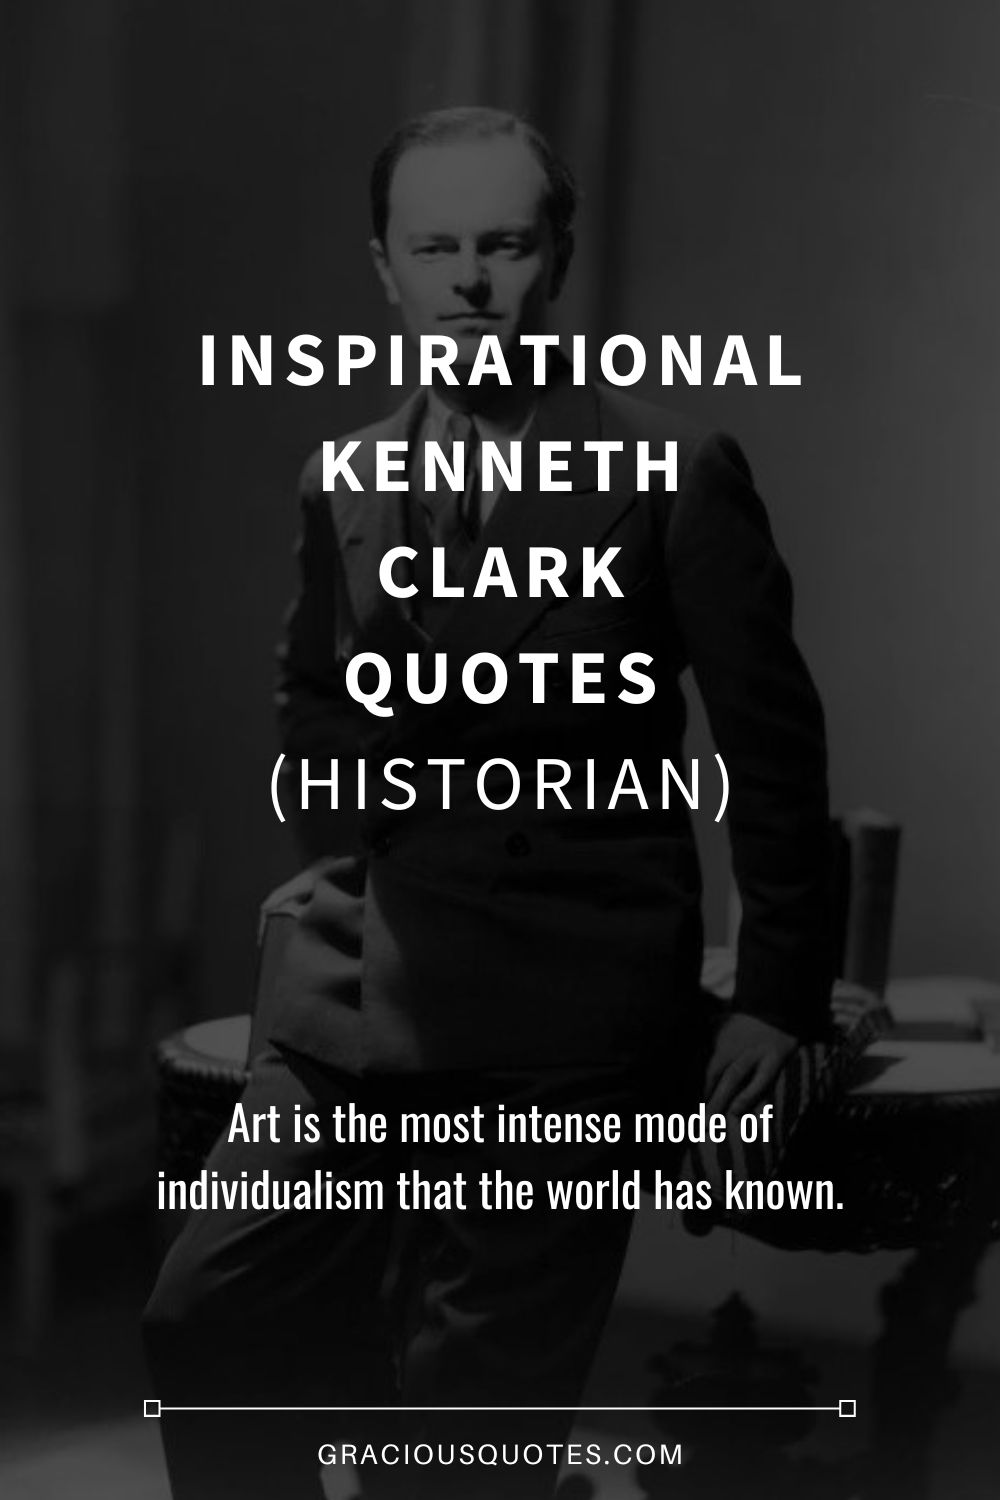 Inspirational Kenneth Clark Quotes (HISTORIAN) - Gracious Quotes